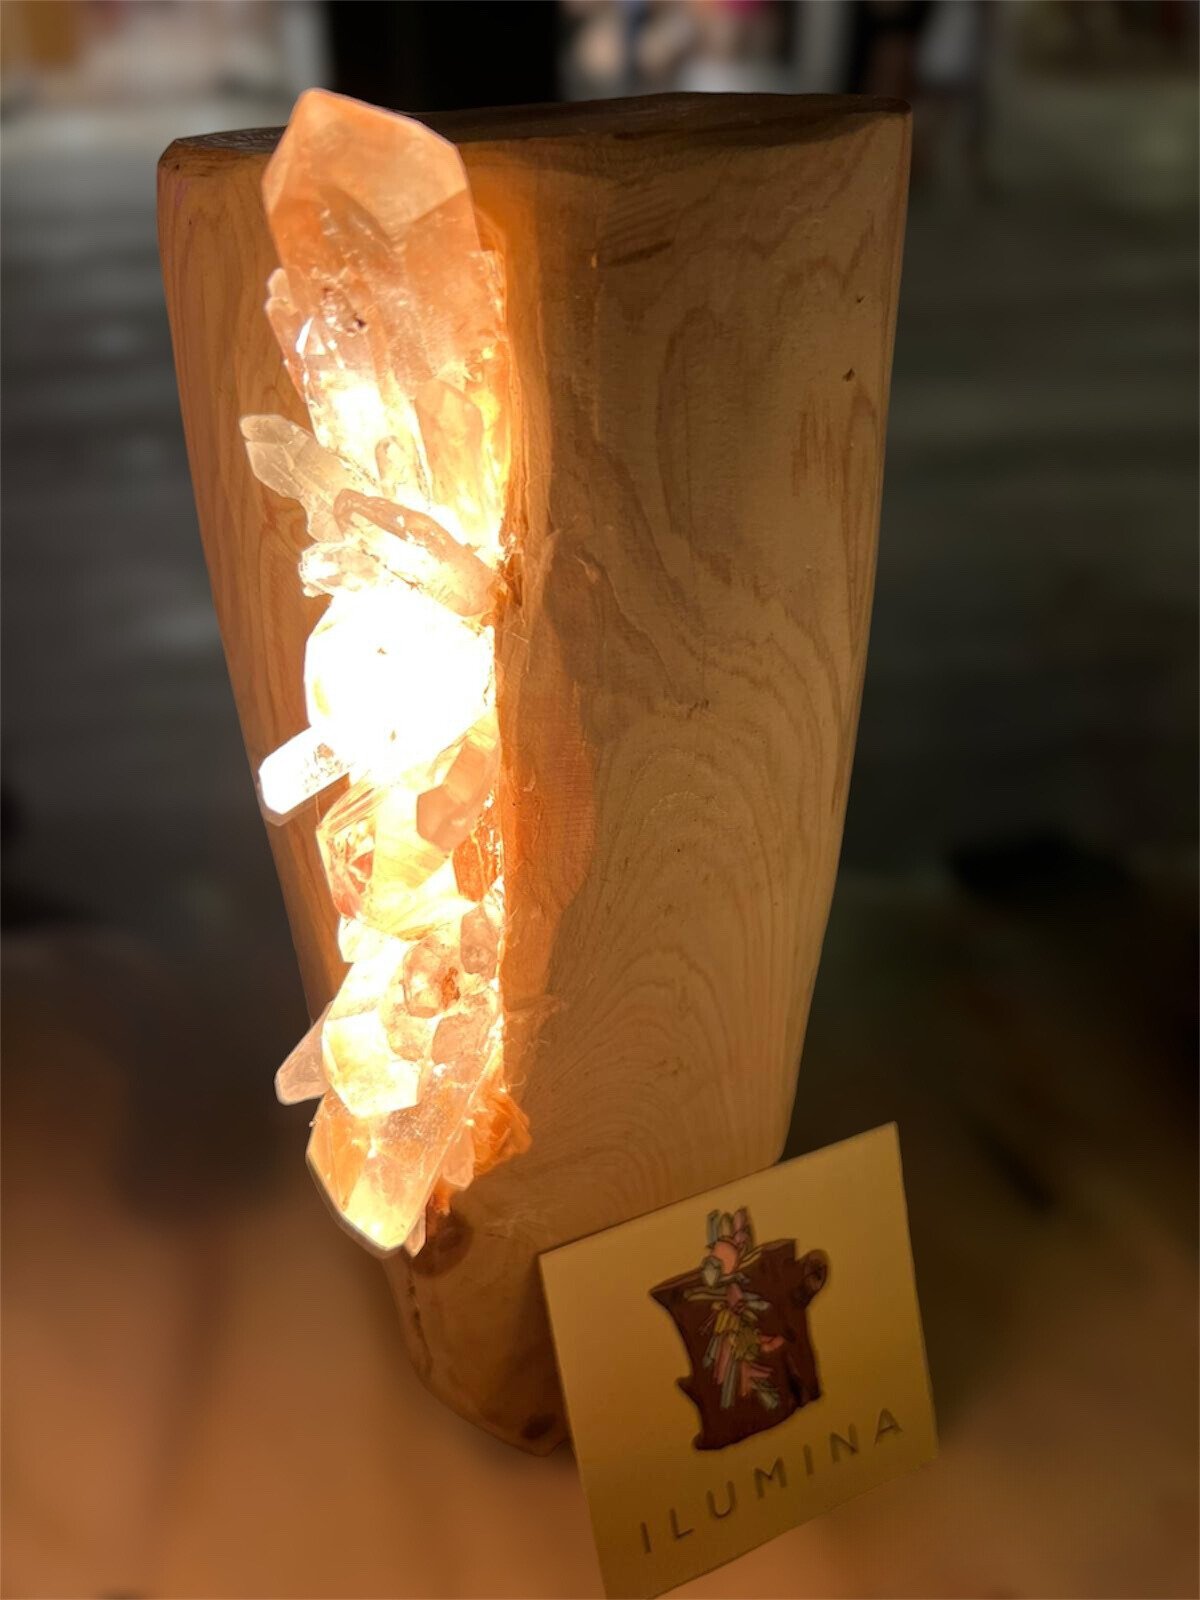 Energy Lamp Made Of Ibizan Sabine Wood, Inlaid With Mineral Crystals.